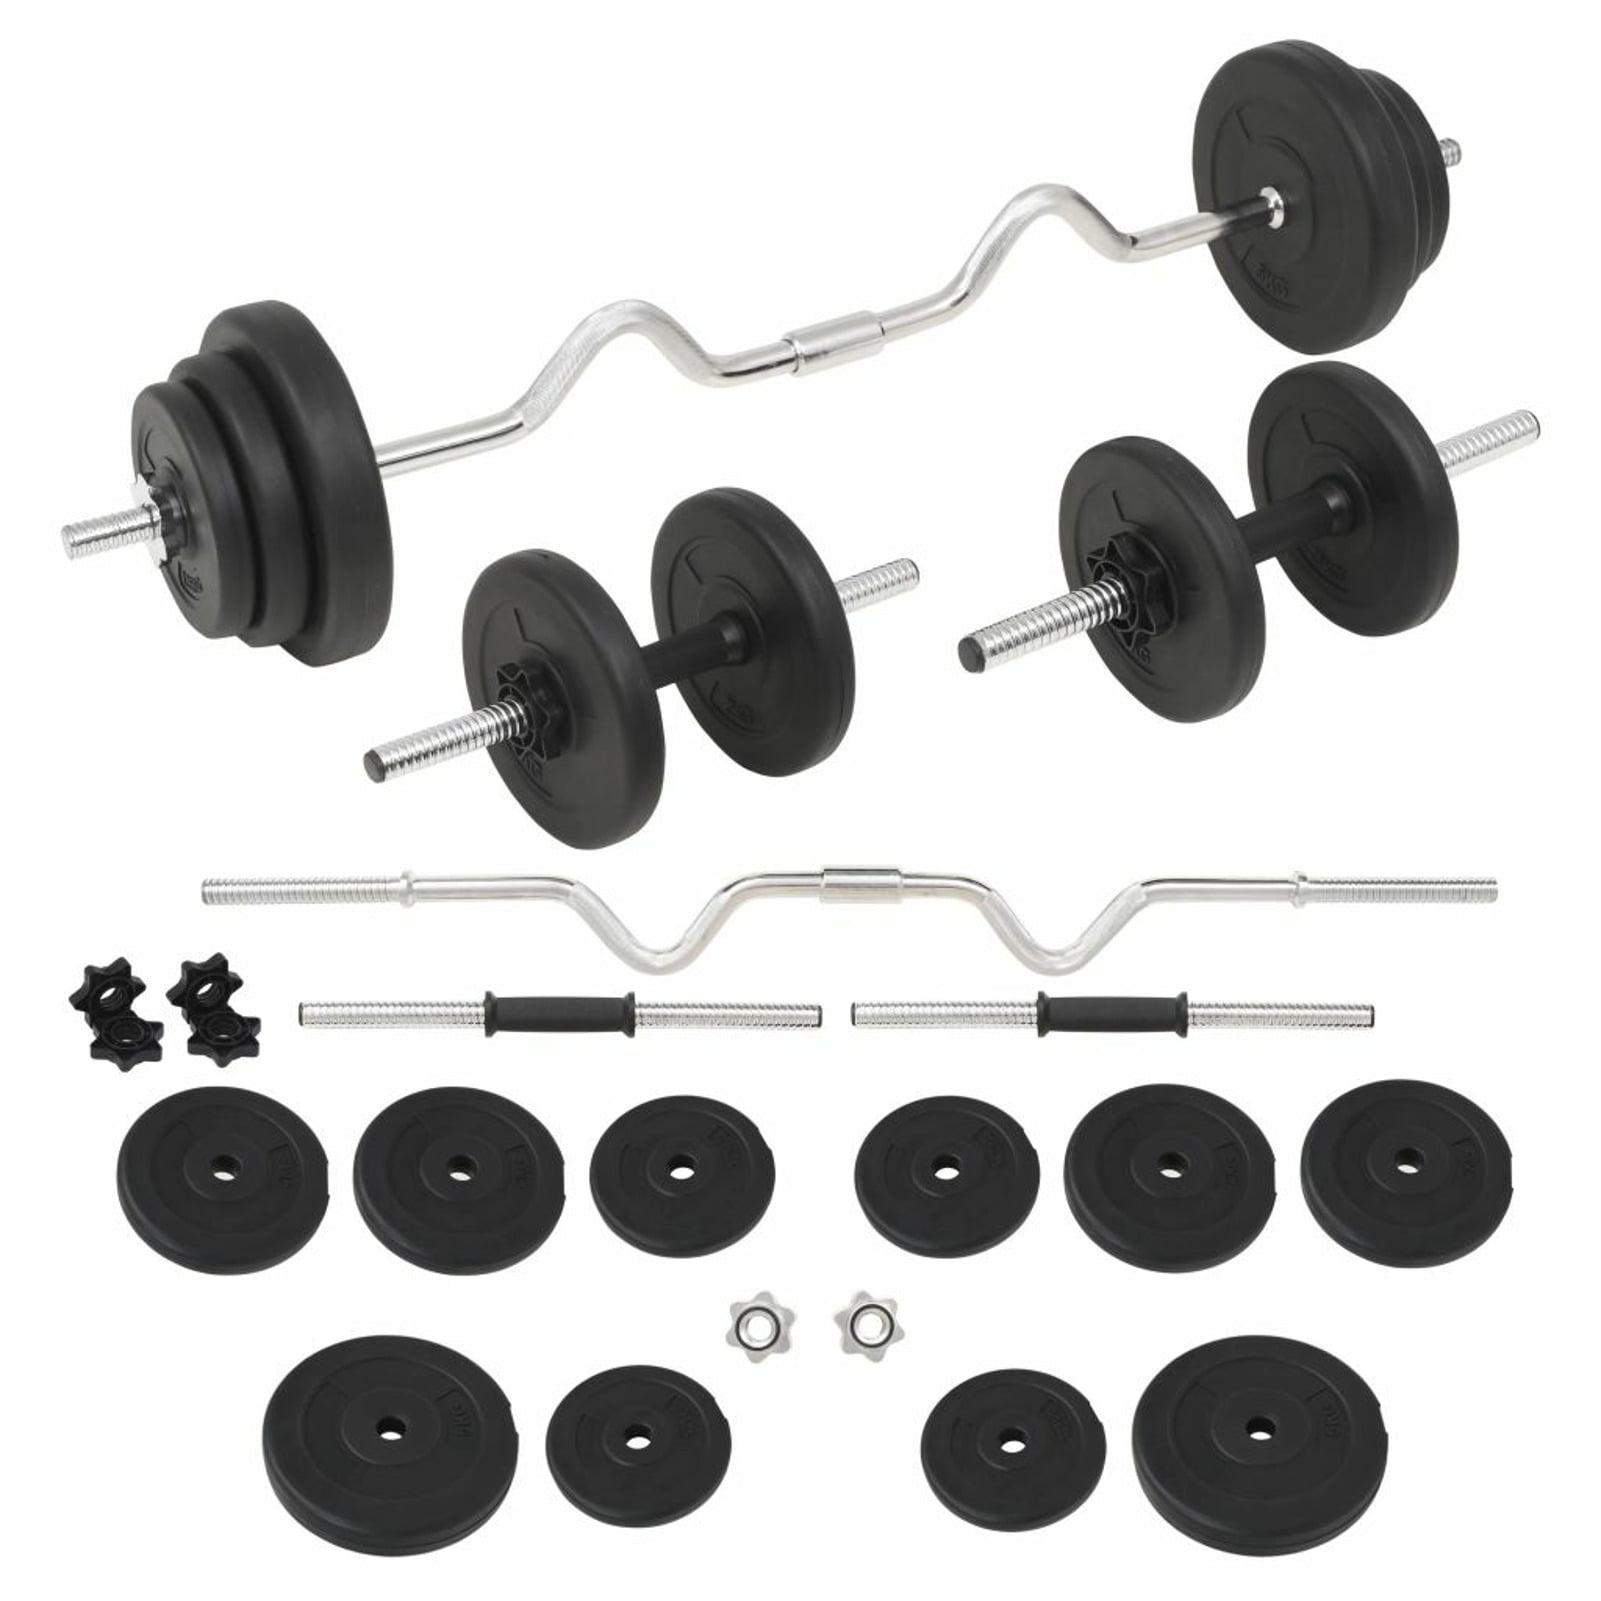 Details about   HOME Totall 88LB Weight Dumbbell Set CAP Gym Barbell Plates Body Workout 